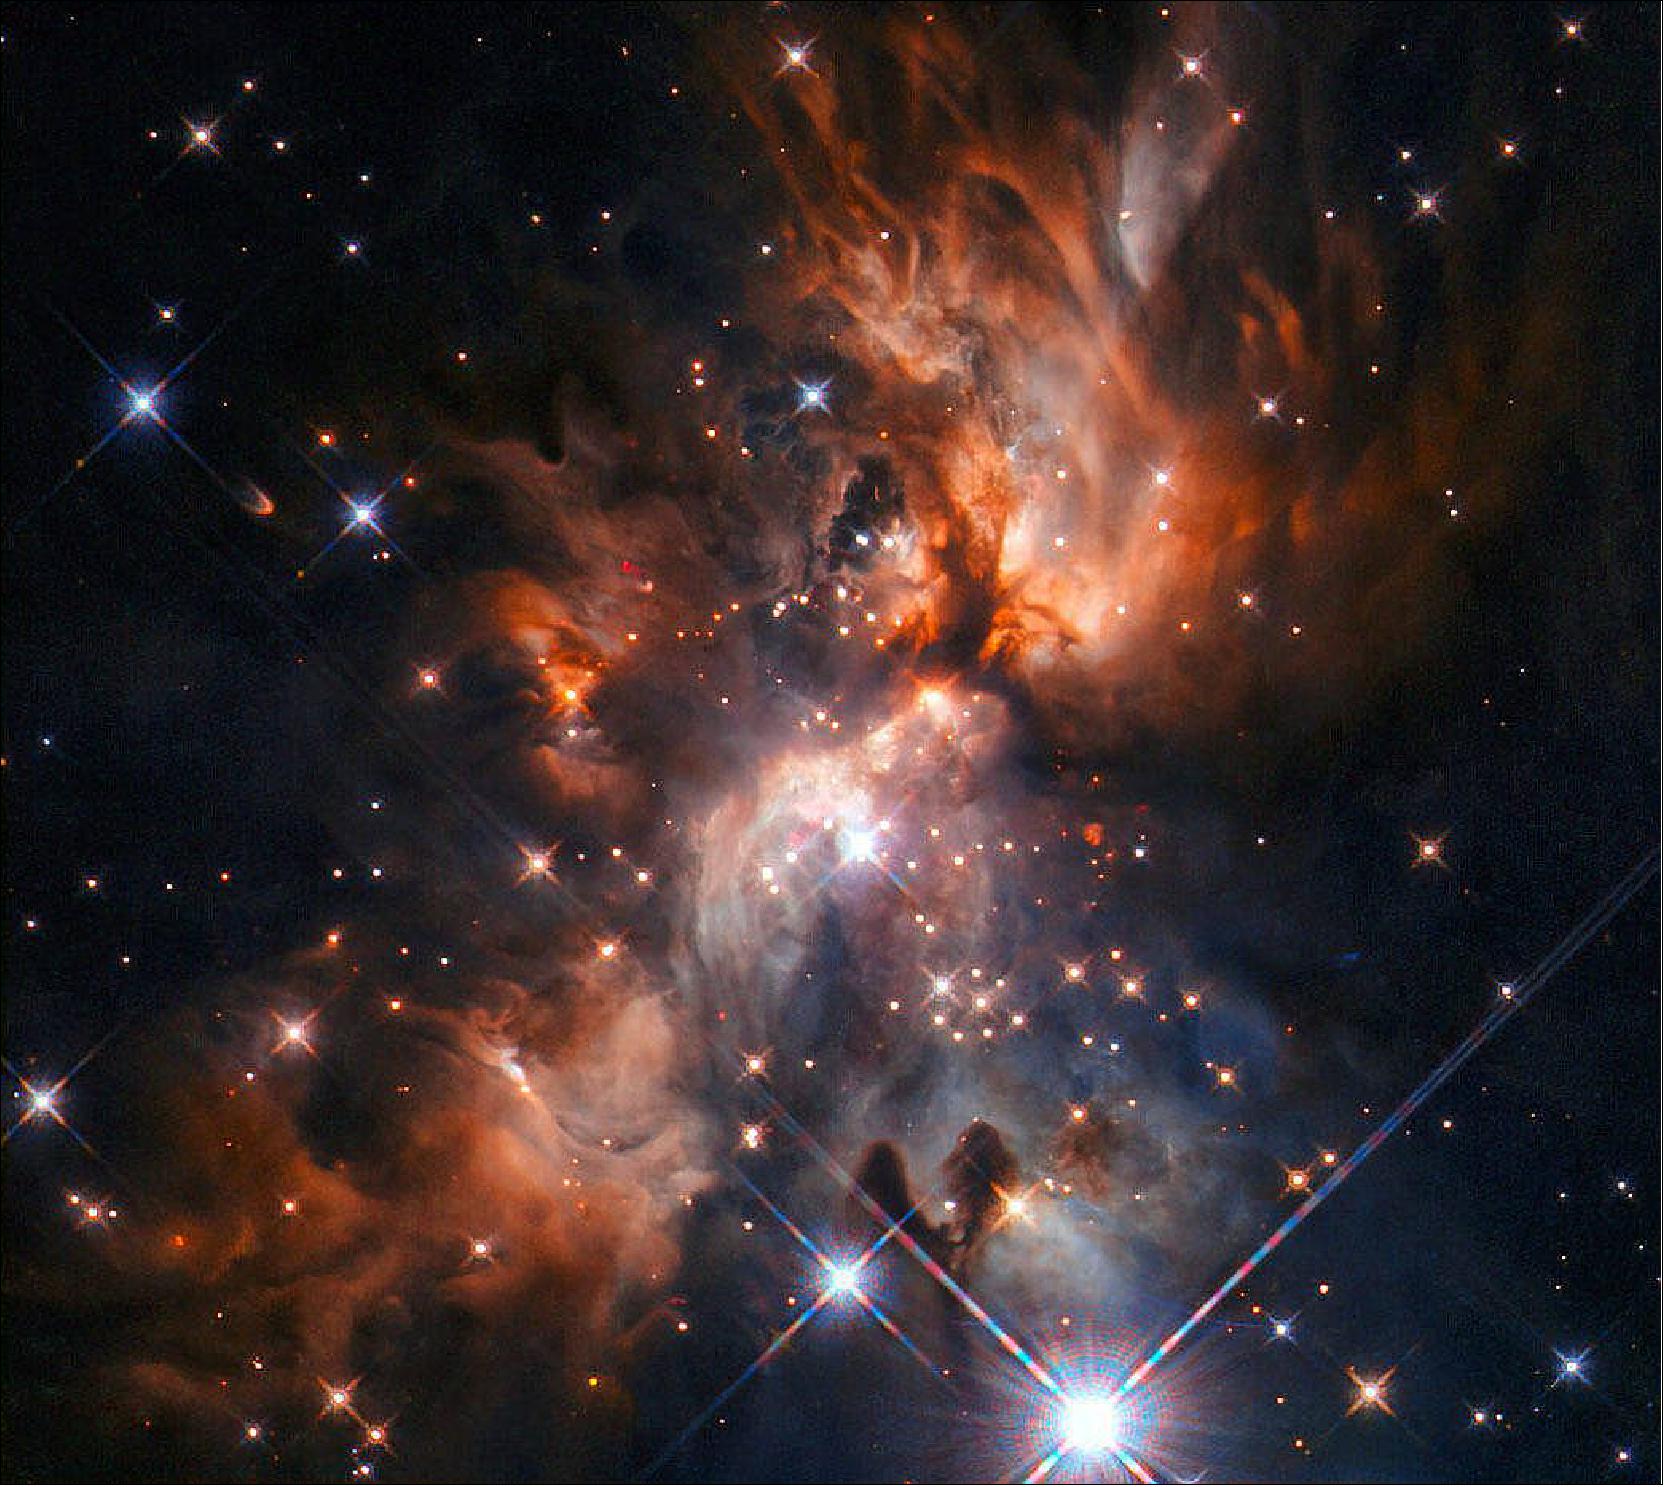 Figure 56: This image from the NASA/ESA Hubble Space Telescope features AFGL 5180, a beautiful stellar nursery located in the constellation of Gemini (the Twins). At the center of the image, a massive star is forming and blasting cavities through the clouds with a pair of powerful jets, extending to the top right and bottom left of the image. Light from this star is mostly escaping and reaching us by illuminating these cavities, like a lighthouse piercing through the storm clouds [Text credit: European Space Agency (ESA), image credit: ESA/Hubble & NASA, J. C. Tan (Chalmers University & University of Virginia), R. Fedriani (Chalmers University); Acknowledgment: Judy Schmidt]